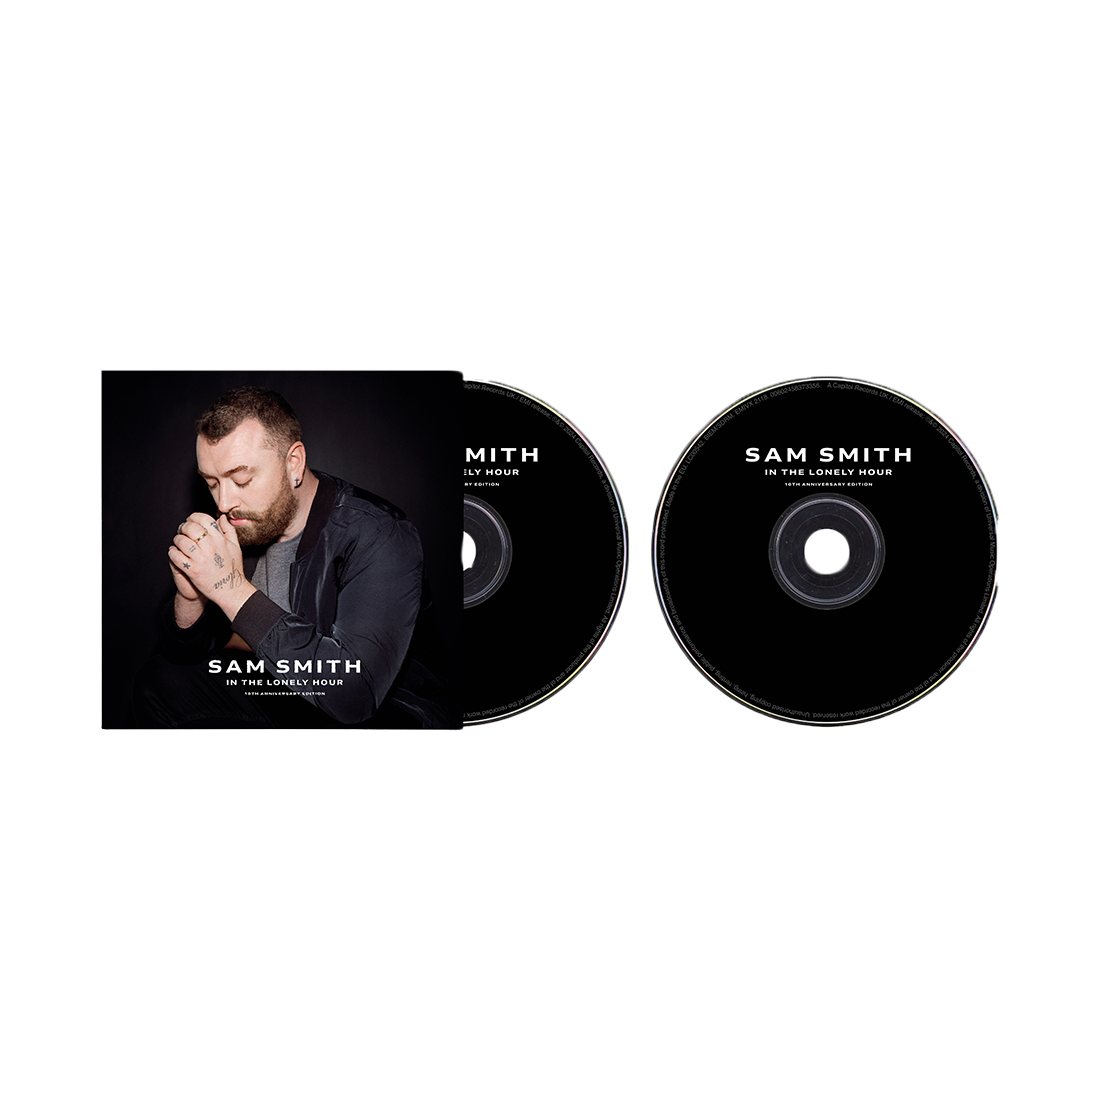 Sam Smith - In The Lonely Hour (10th Anniversary Edition) 2CD